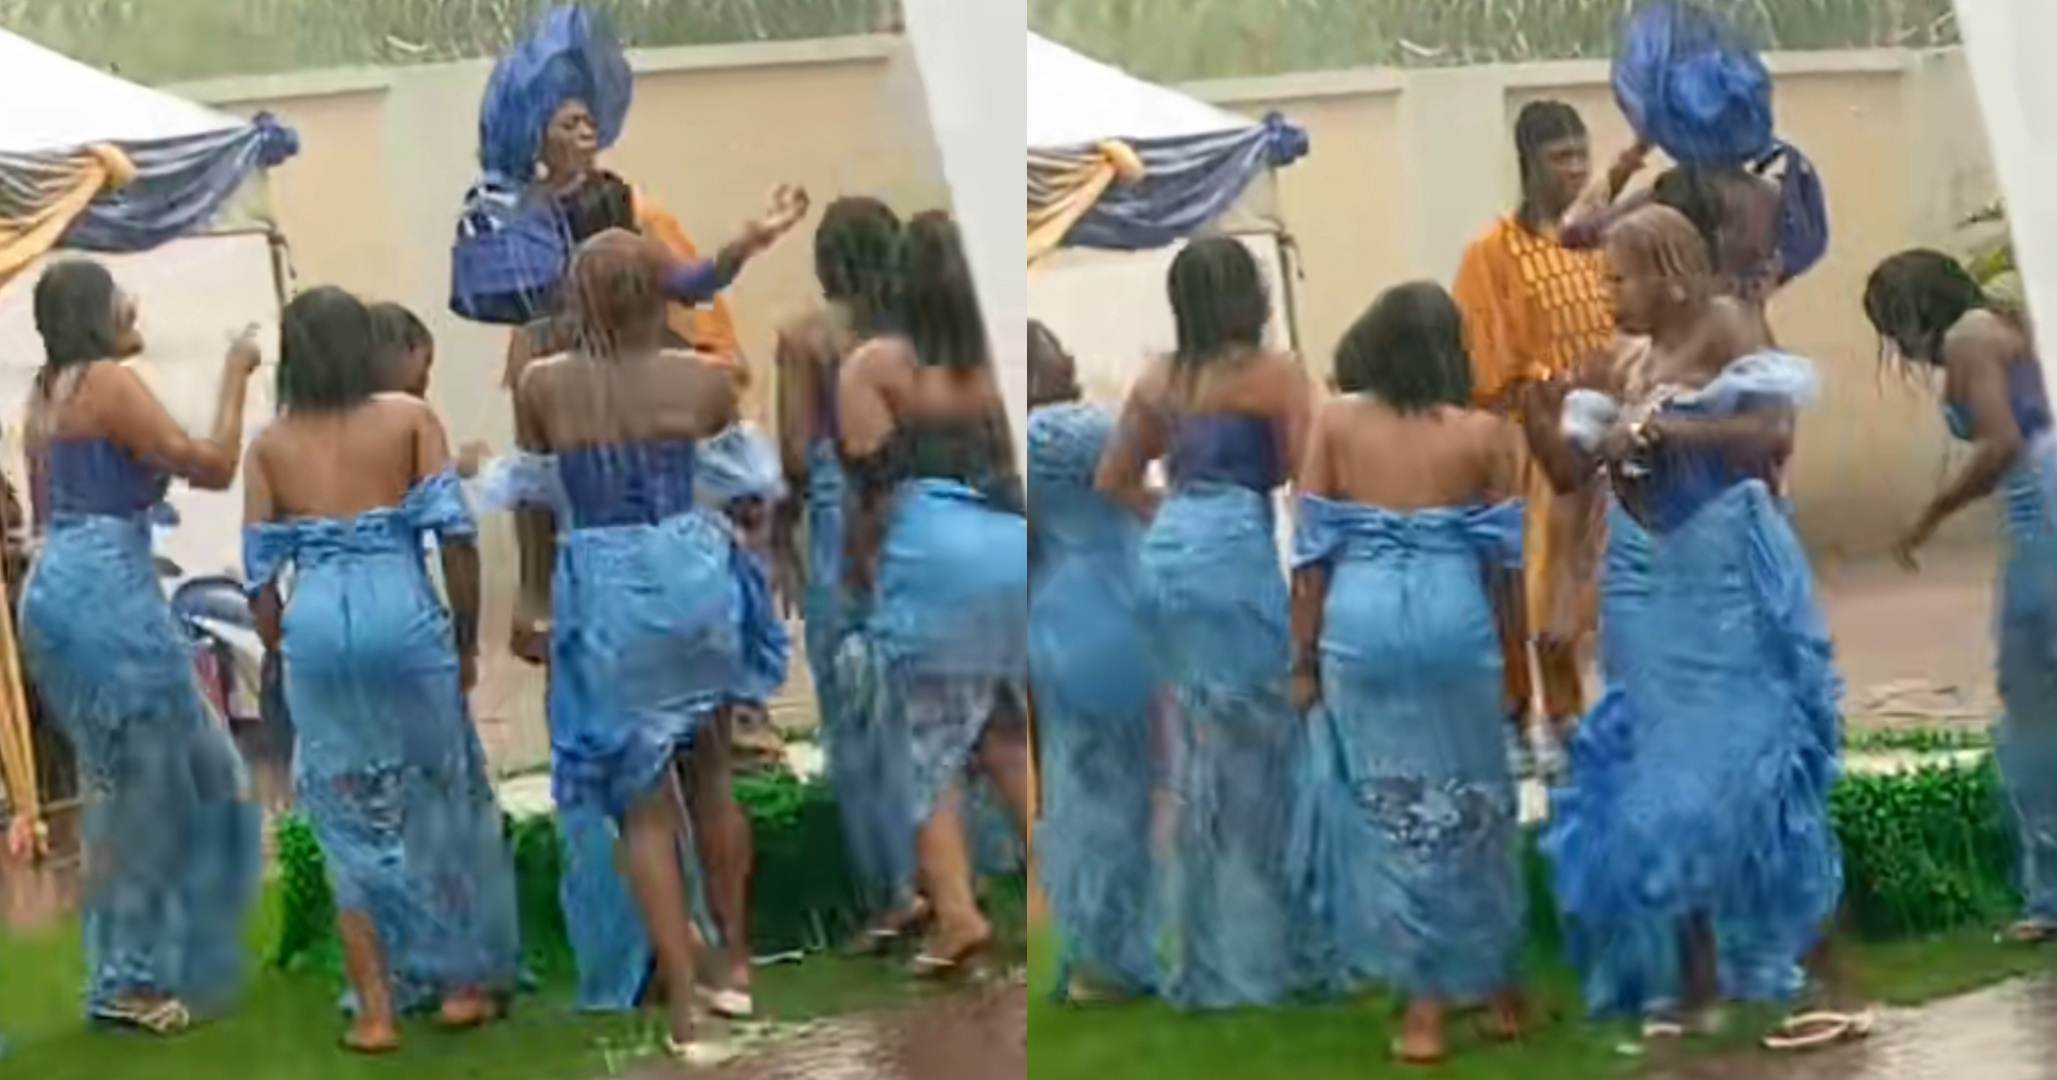 "Pure love" – Reactions as Aso-ebi girls join couple to dance in the rain during traditional wedding (Video)